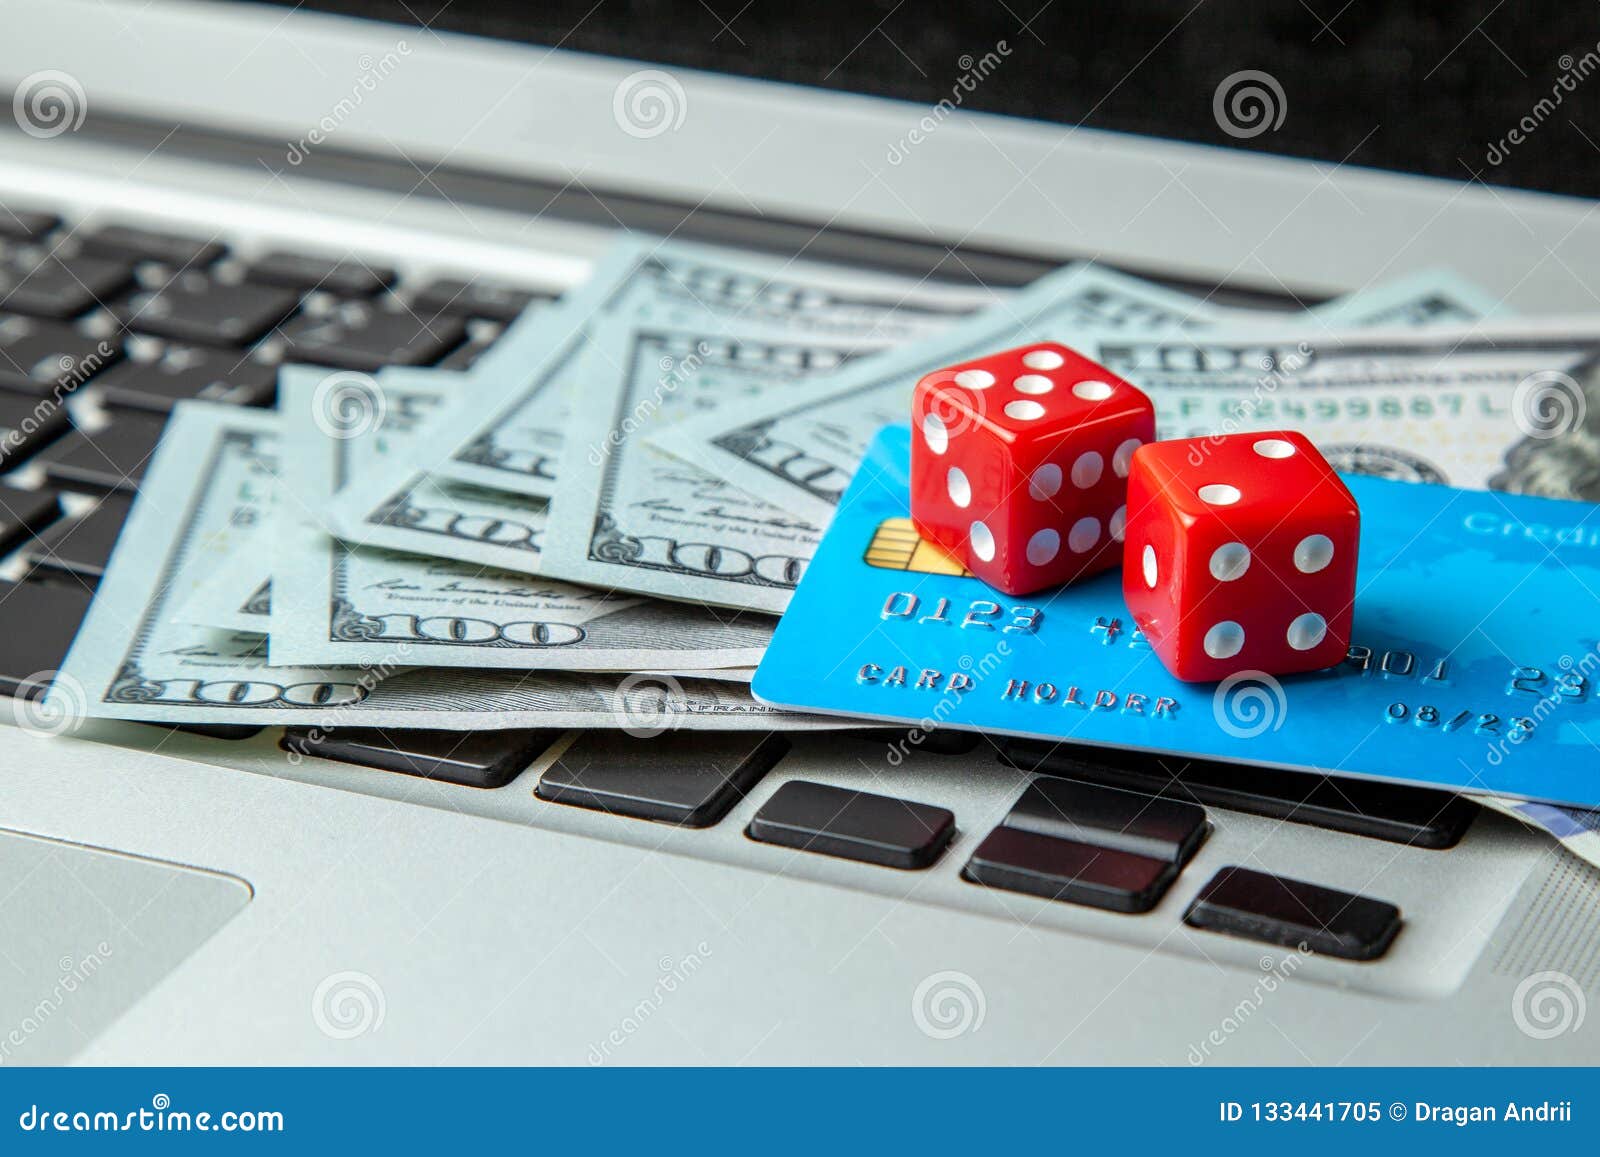 Online Casino, Online Gambling. Money Cash Dollars and Credit Brief with  Dice for Gaming on Laptop Keyboard. Stock Image - Image of addiction,  business: 133441705